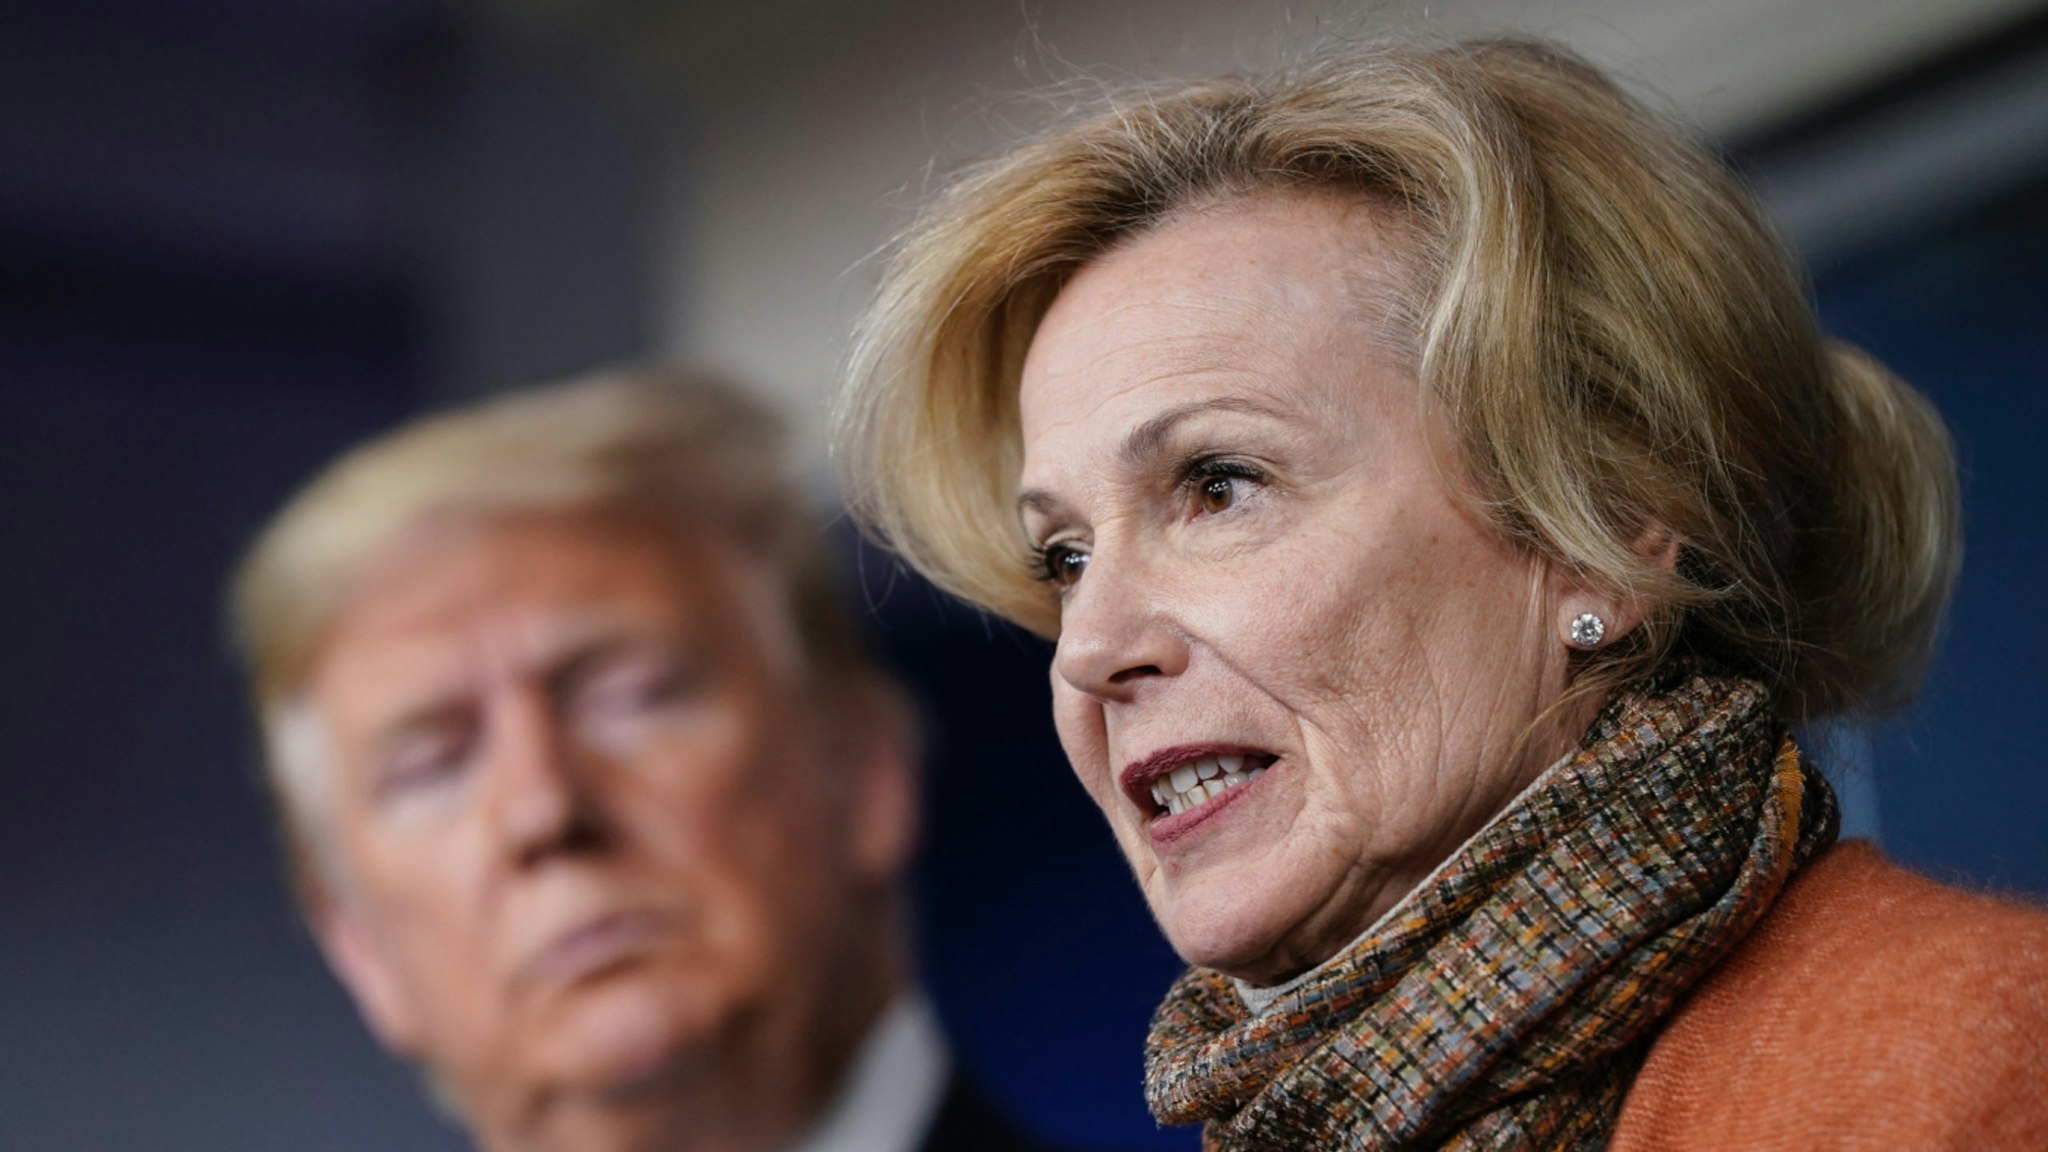 President Donald Trump looks on as White House Coronavirus Response Coordinator Dr. Deborah Birx speaks about the coronavirus outbreak in the press briefing room at the White House on March 17, 2020 in Washington, DC.